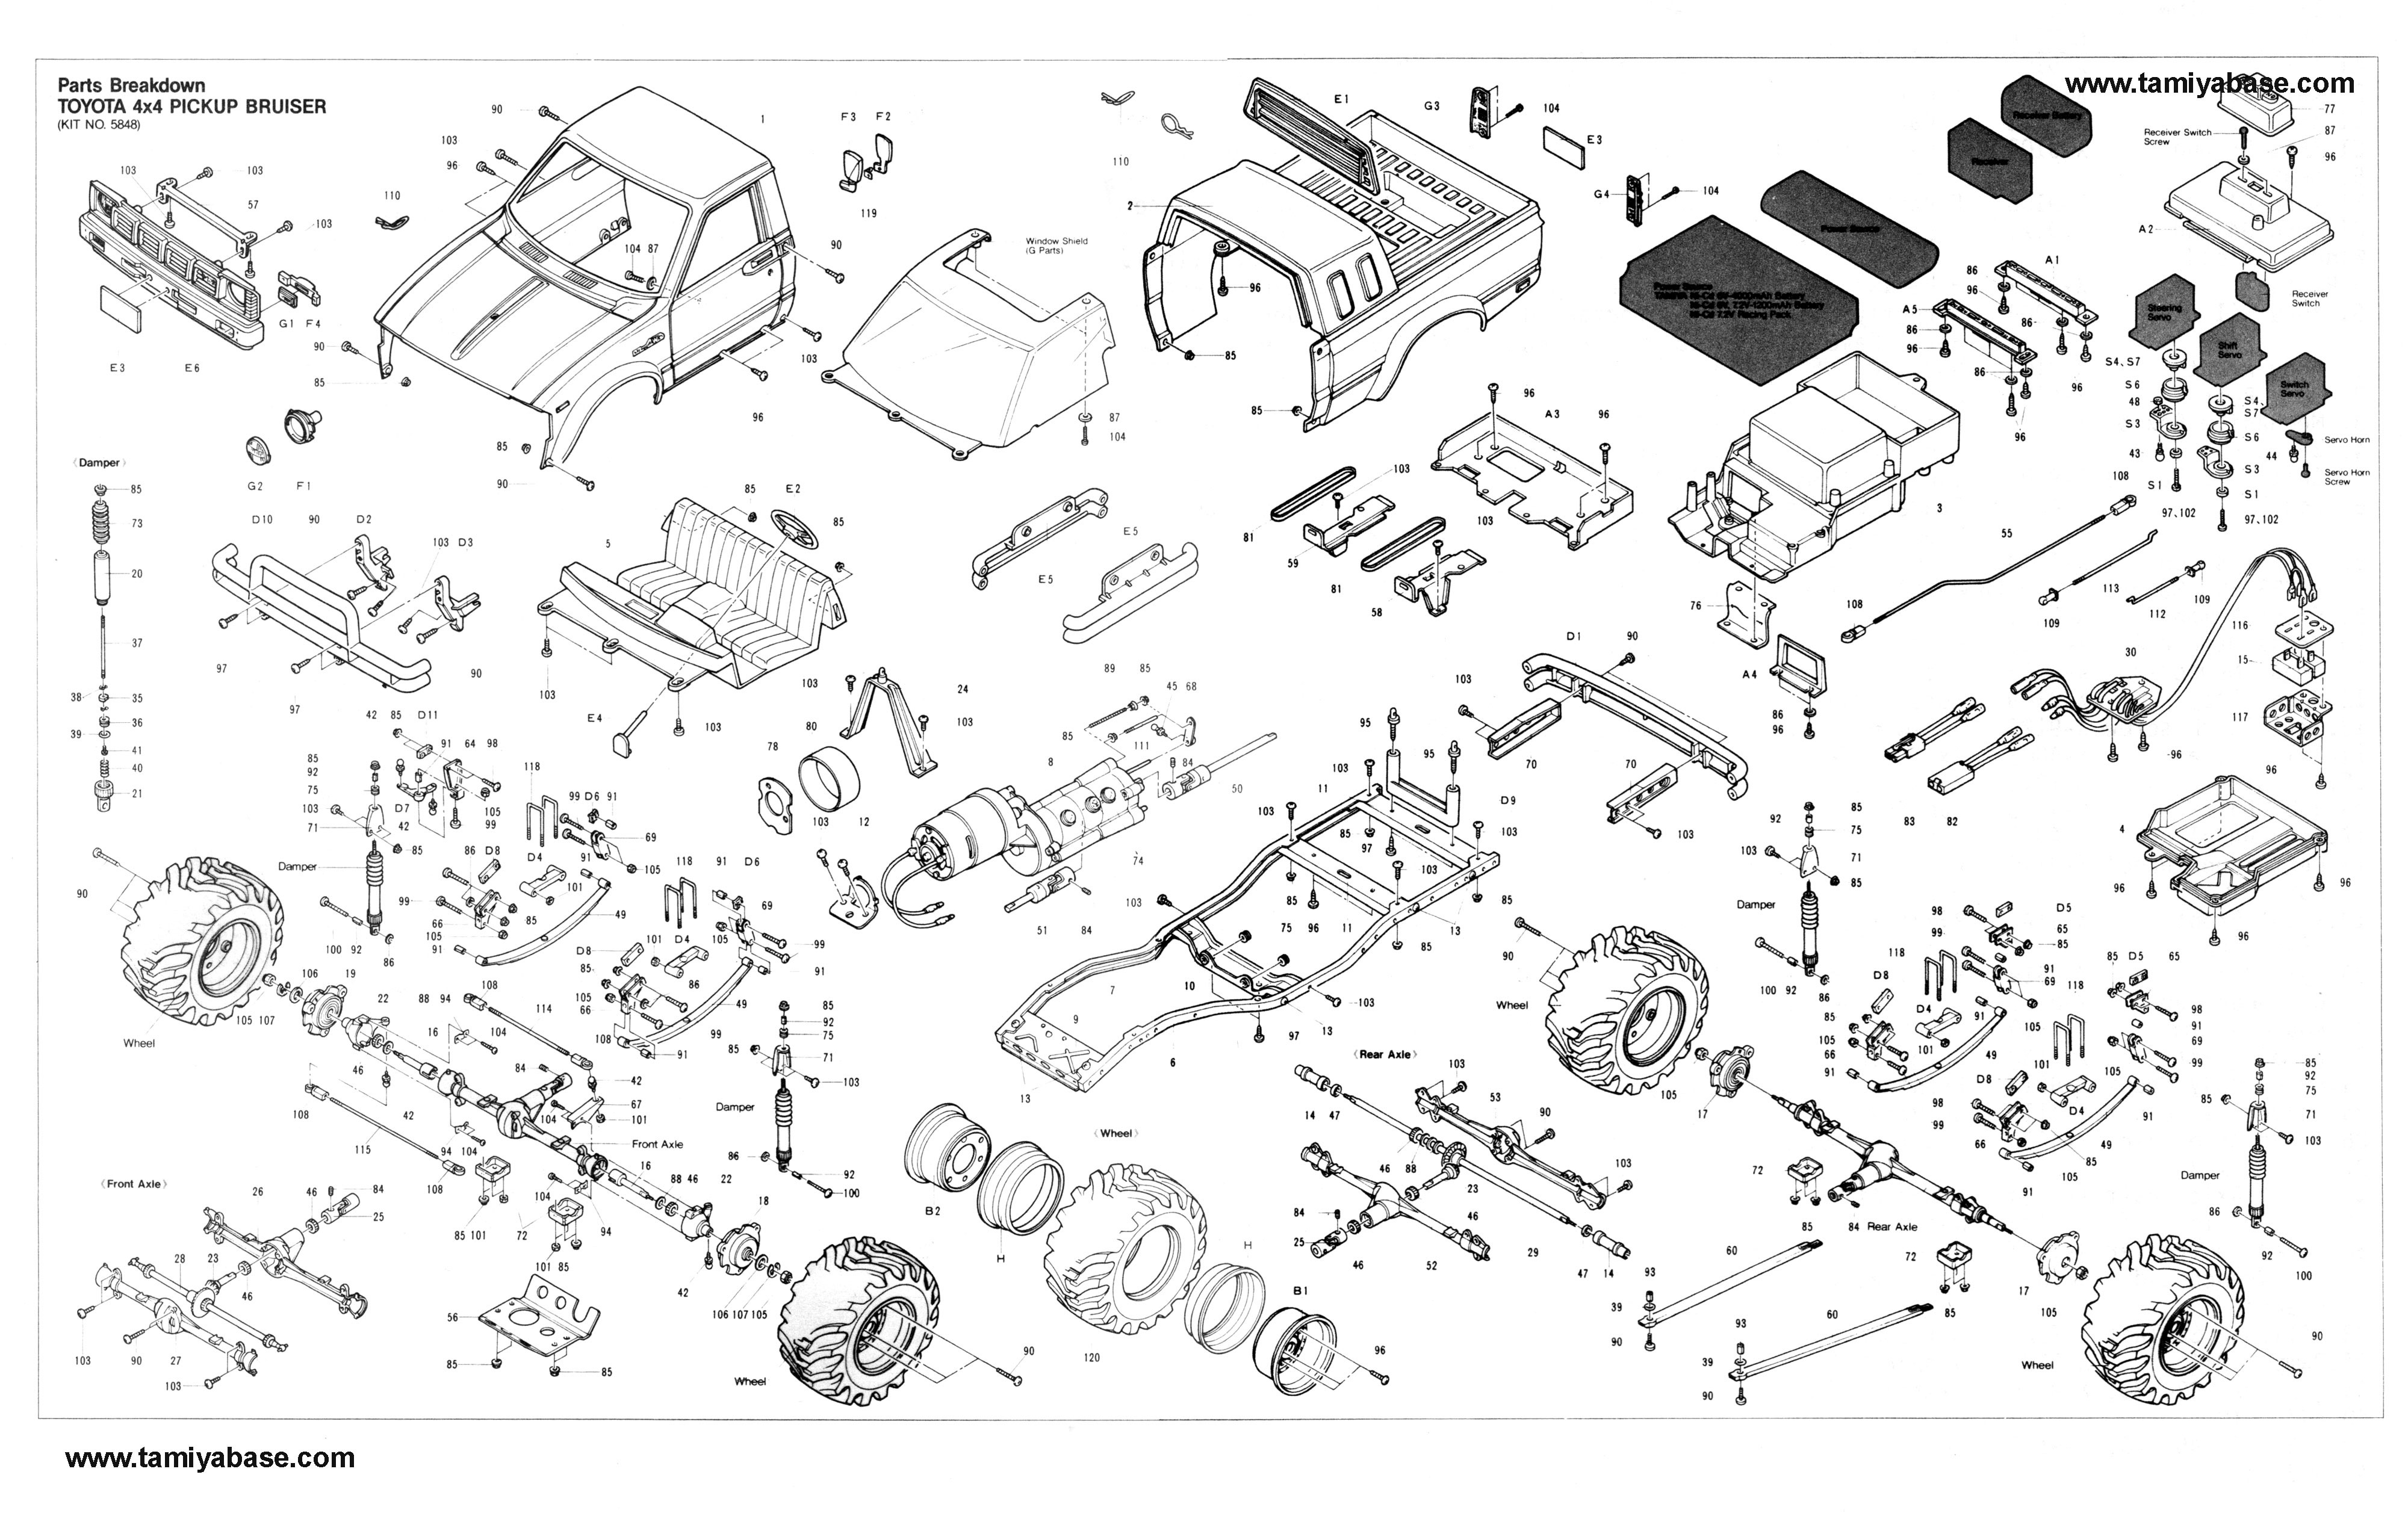 Toyota exploded view